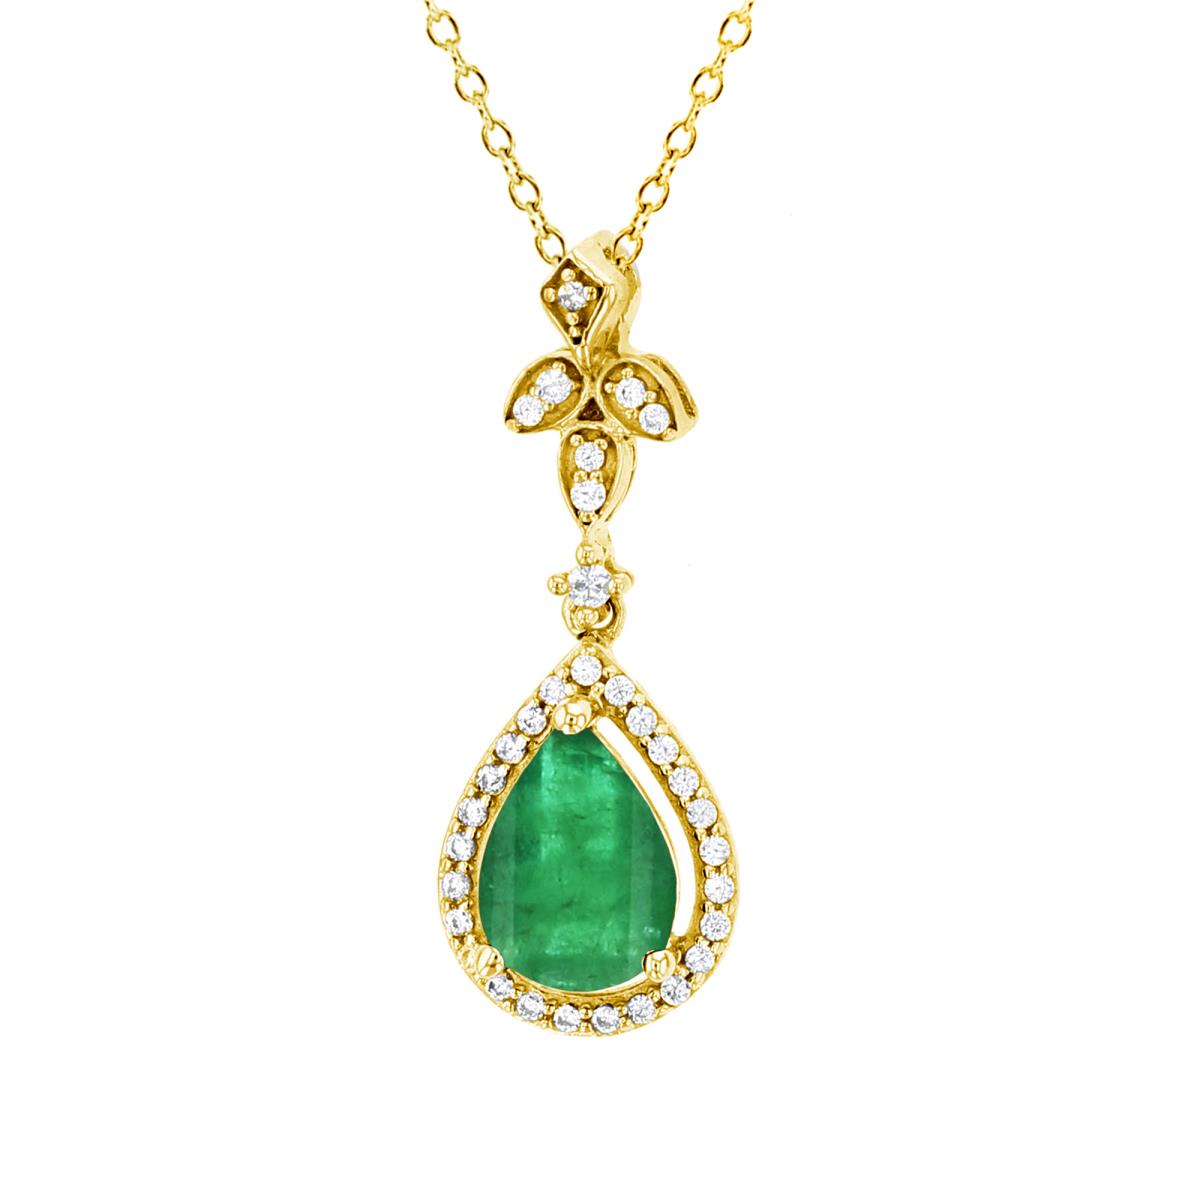 10K Yellow Gold 0.01CTTW Rnd Diamonds & 7x5mm PS Emerald Dangling Halo 18"Necklace